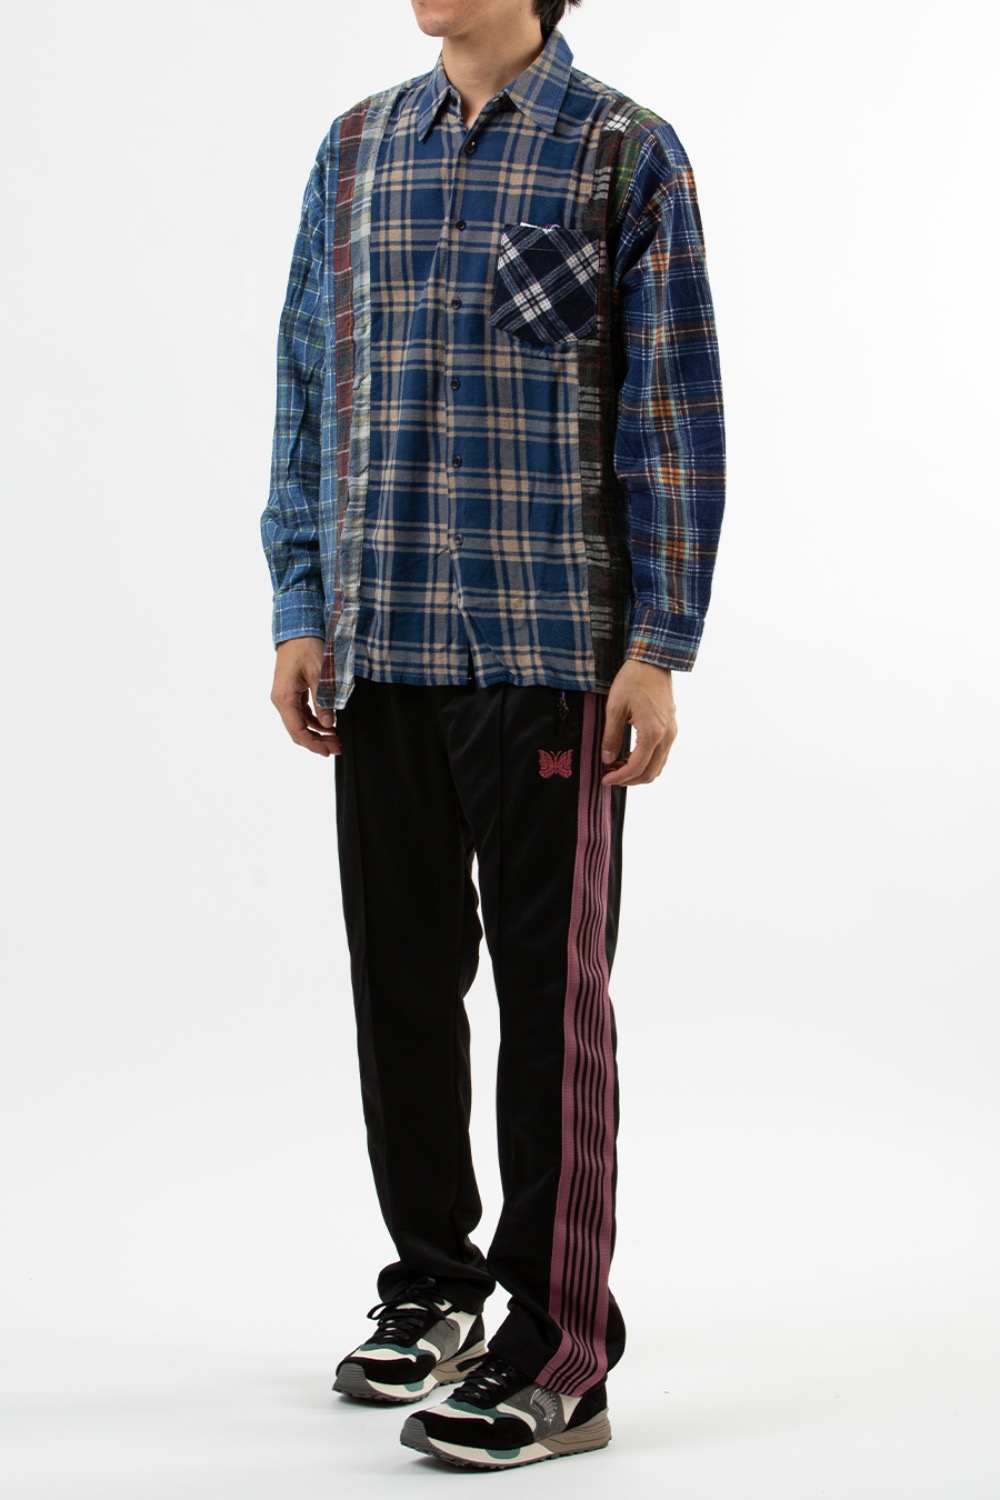 (22FW) - LQ306 Rebuild by Needles Flannel Shirt -&gt; 7 Cuts Wide Shirt (FREE - 8) ASSORTED